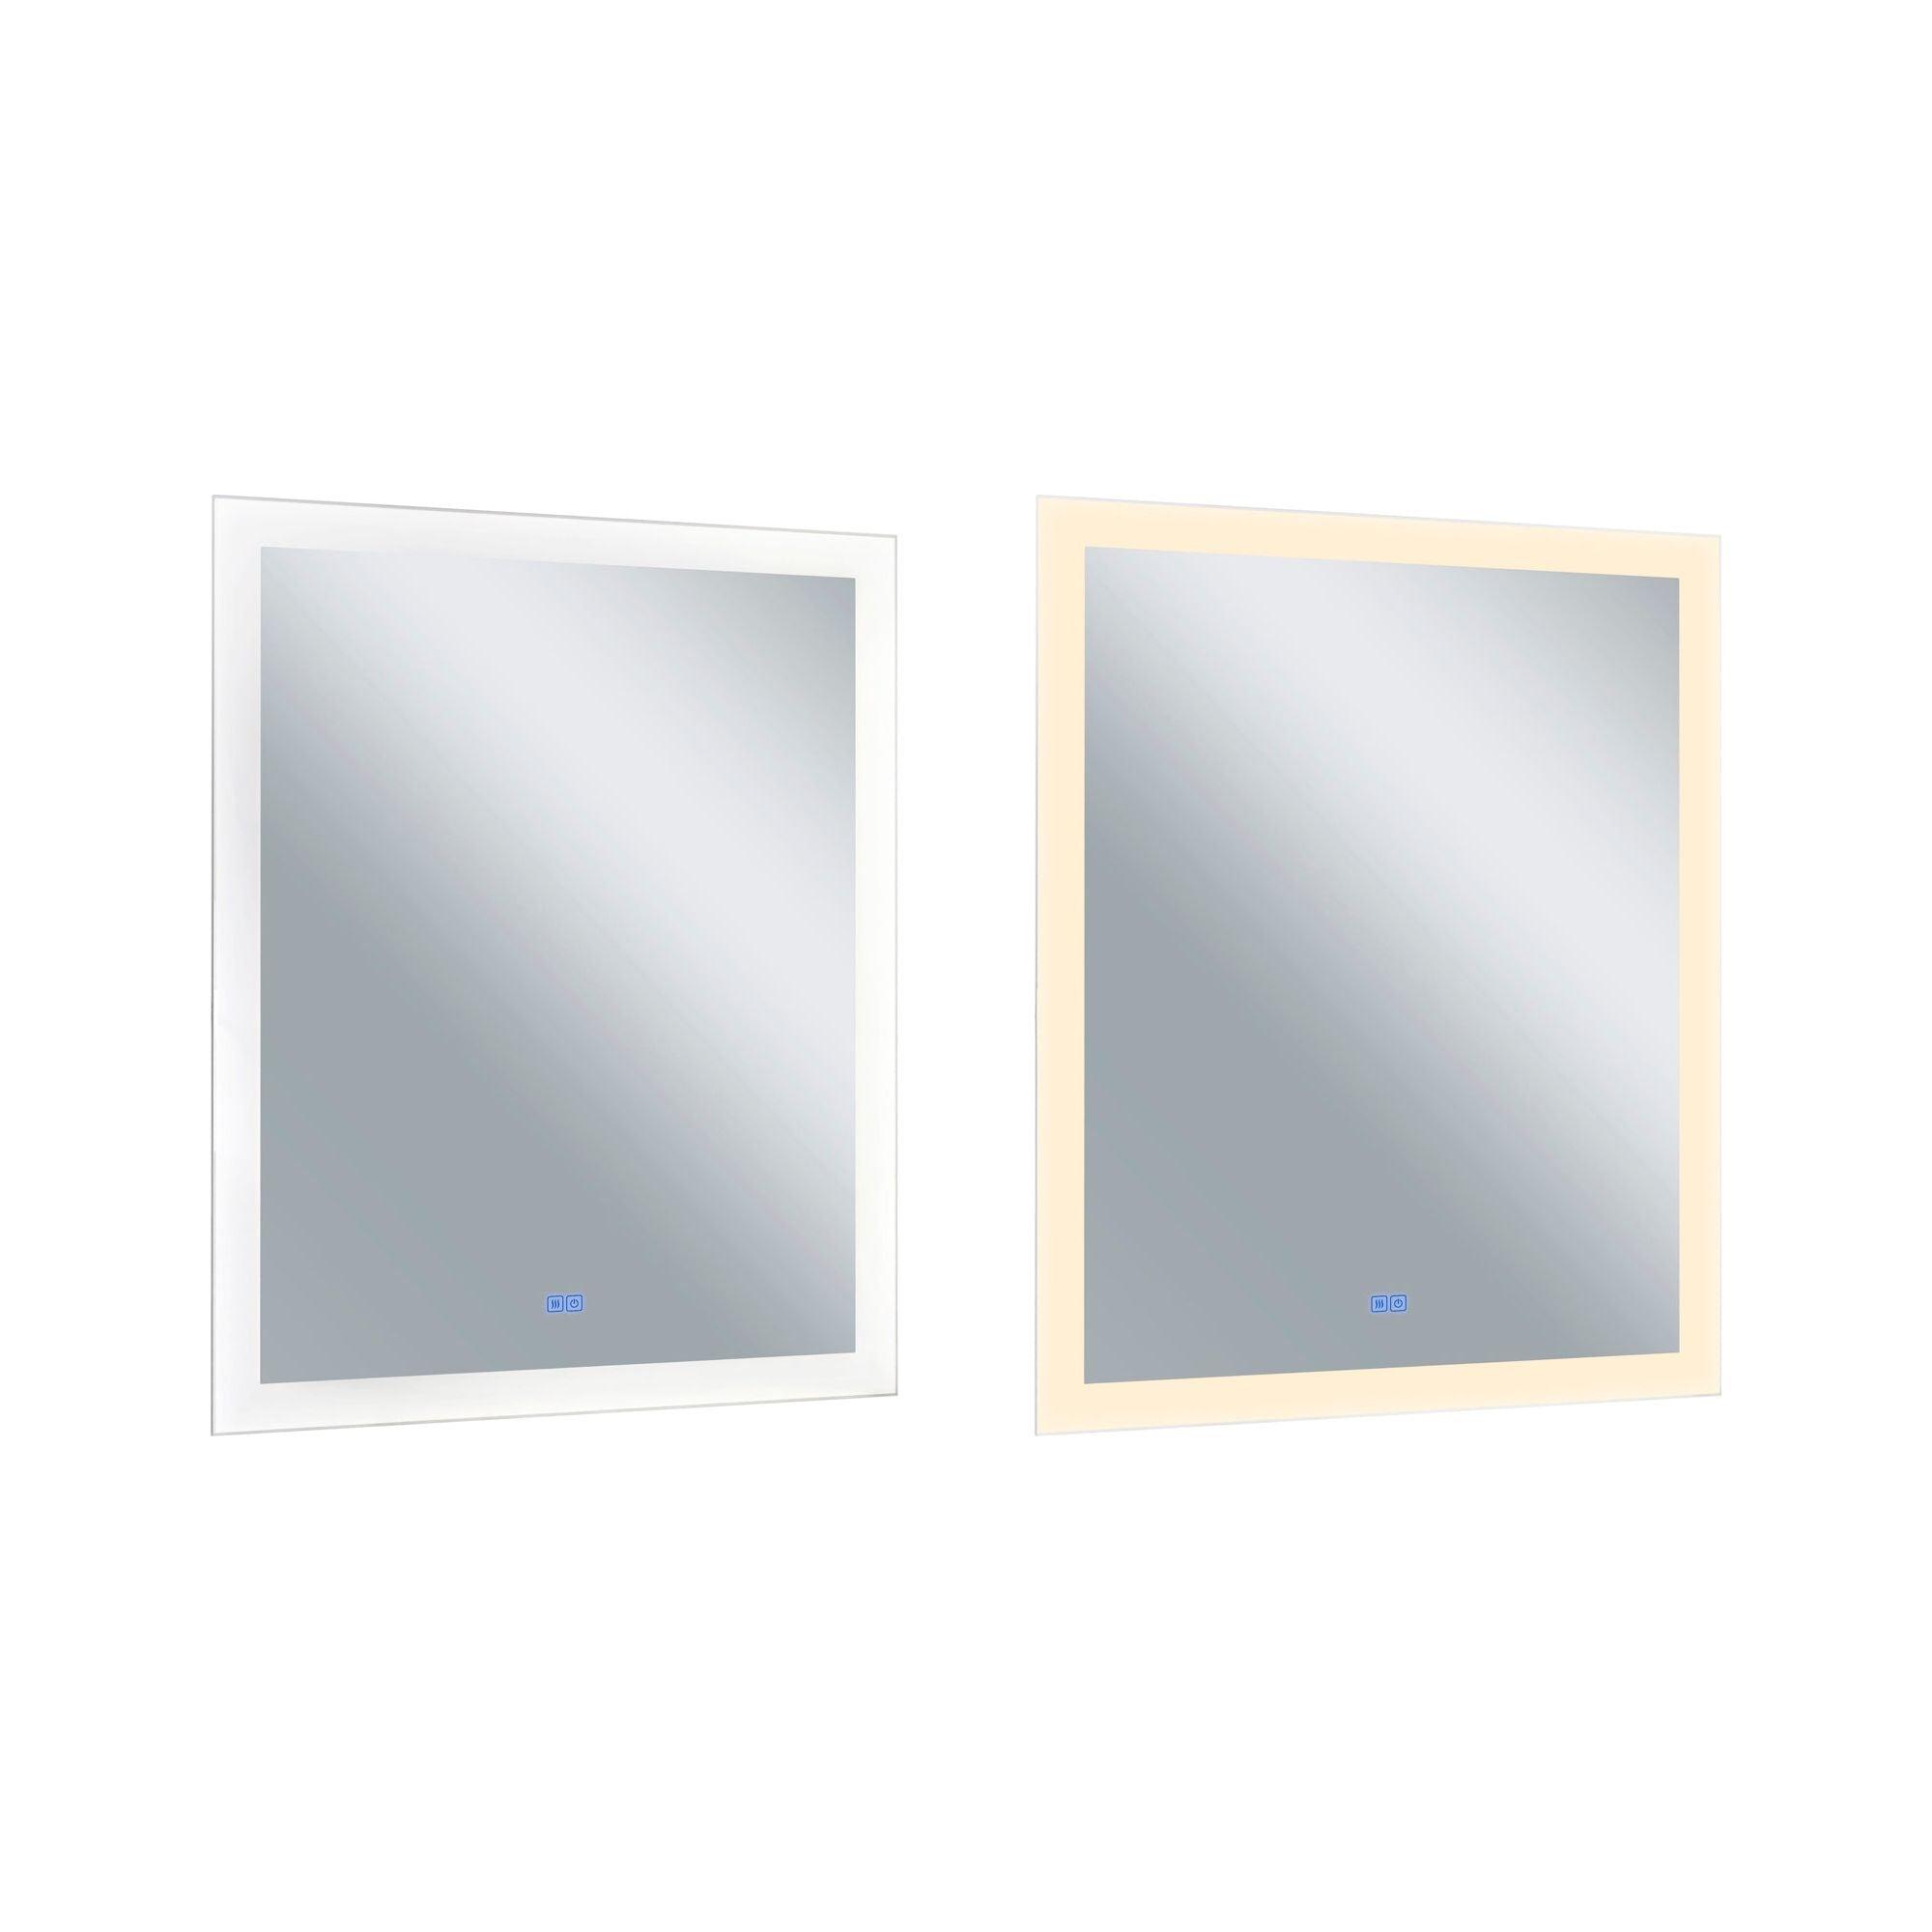 CWI - Abigail Lighted Mirror - Lights Canada